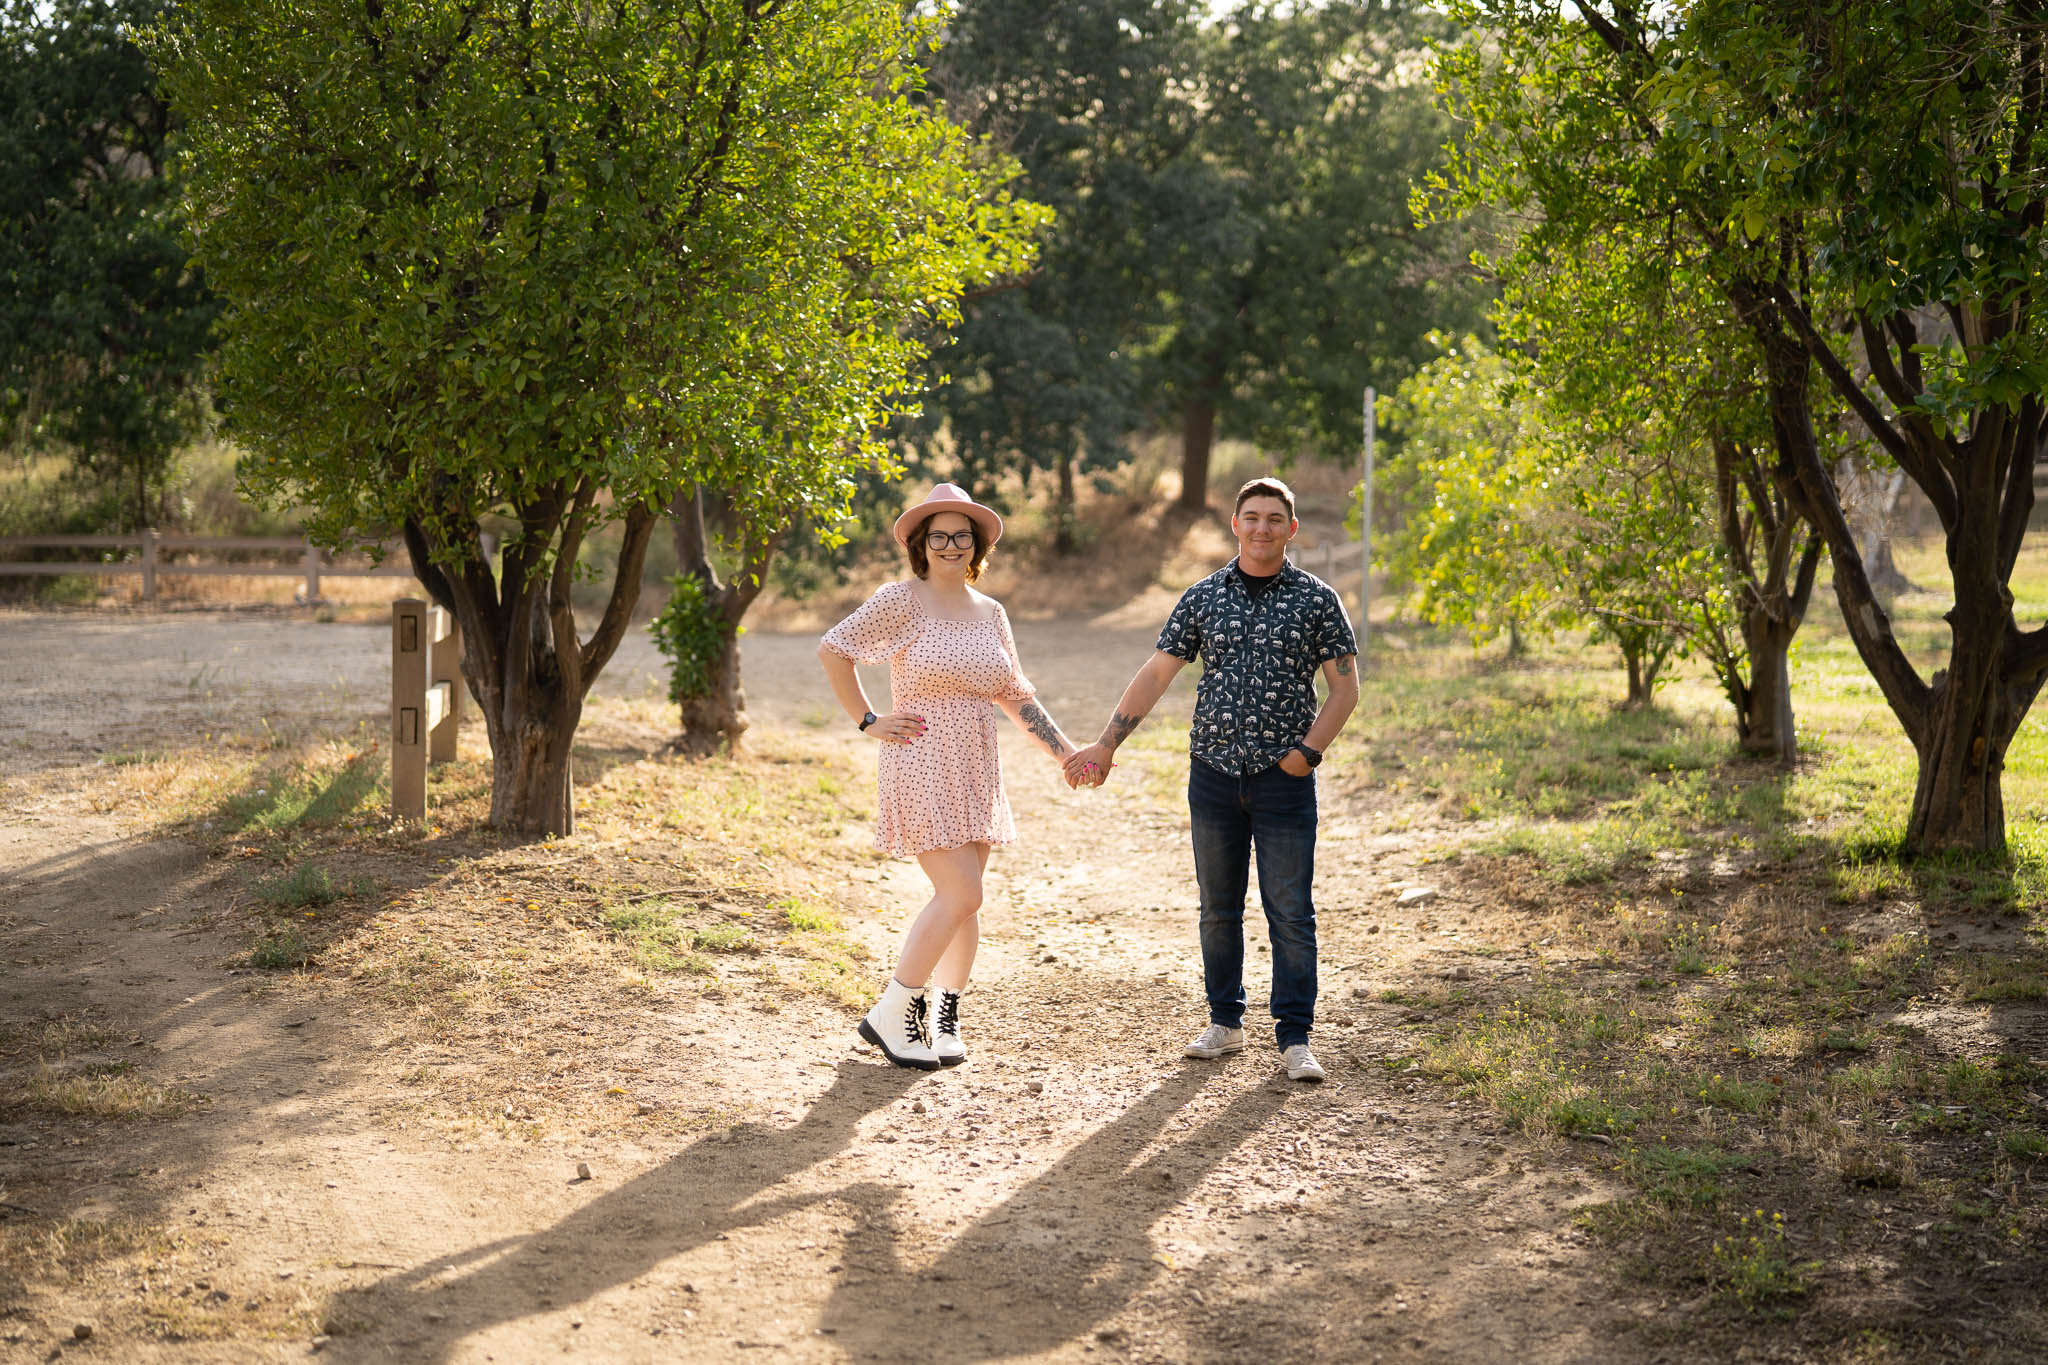 ThomasKim_photography K & S Engagement Session: A couple holding hands on a dirt path.